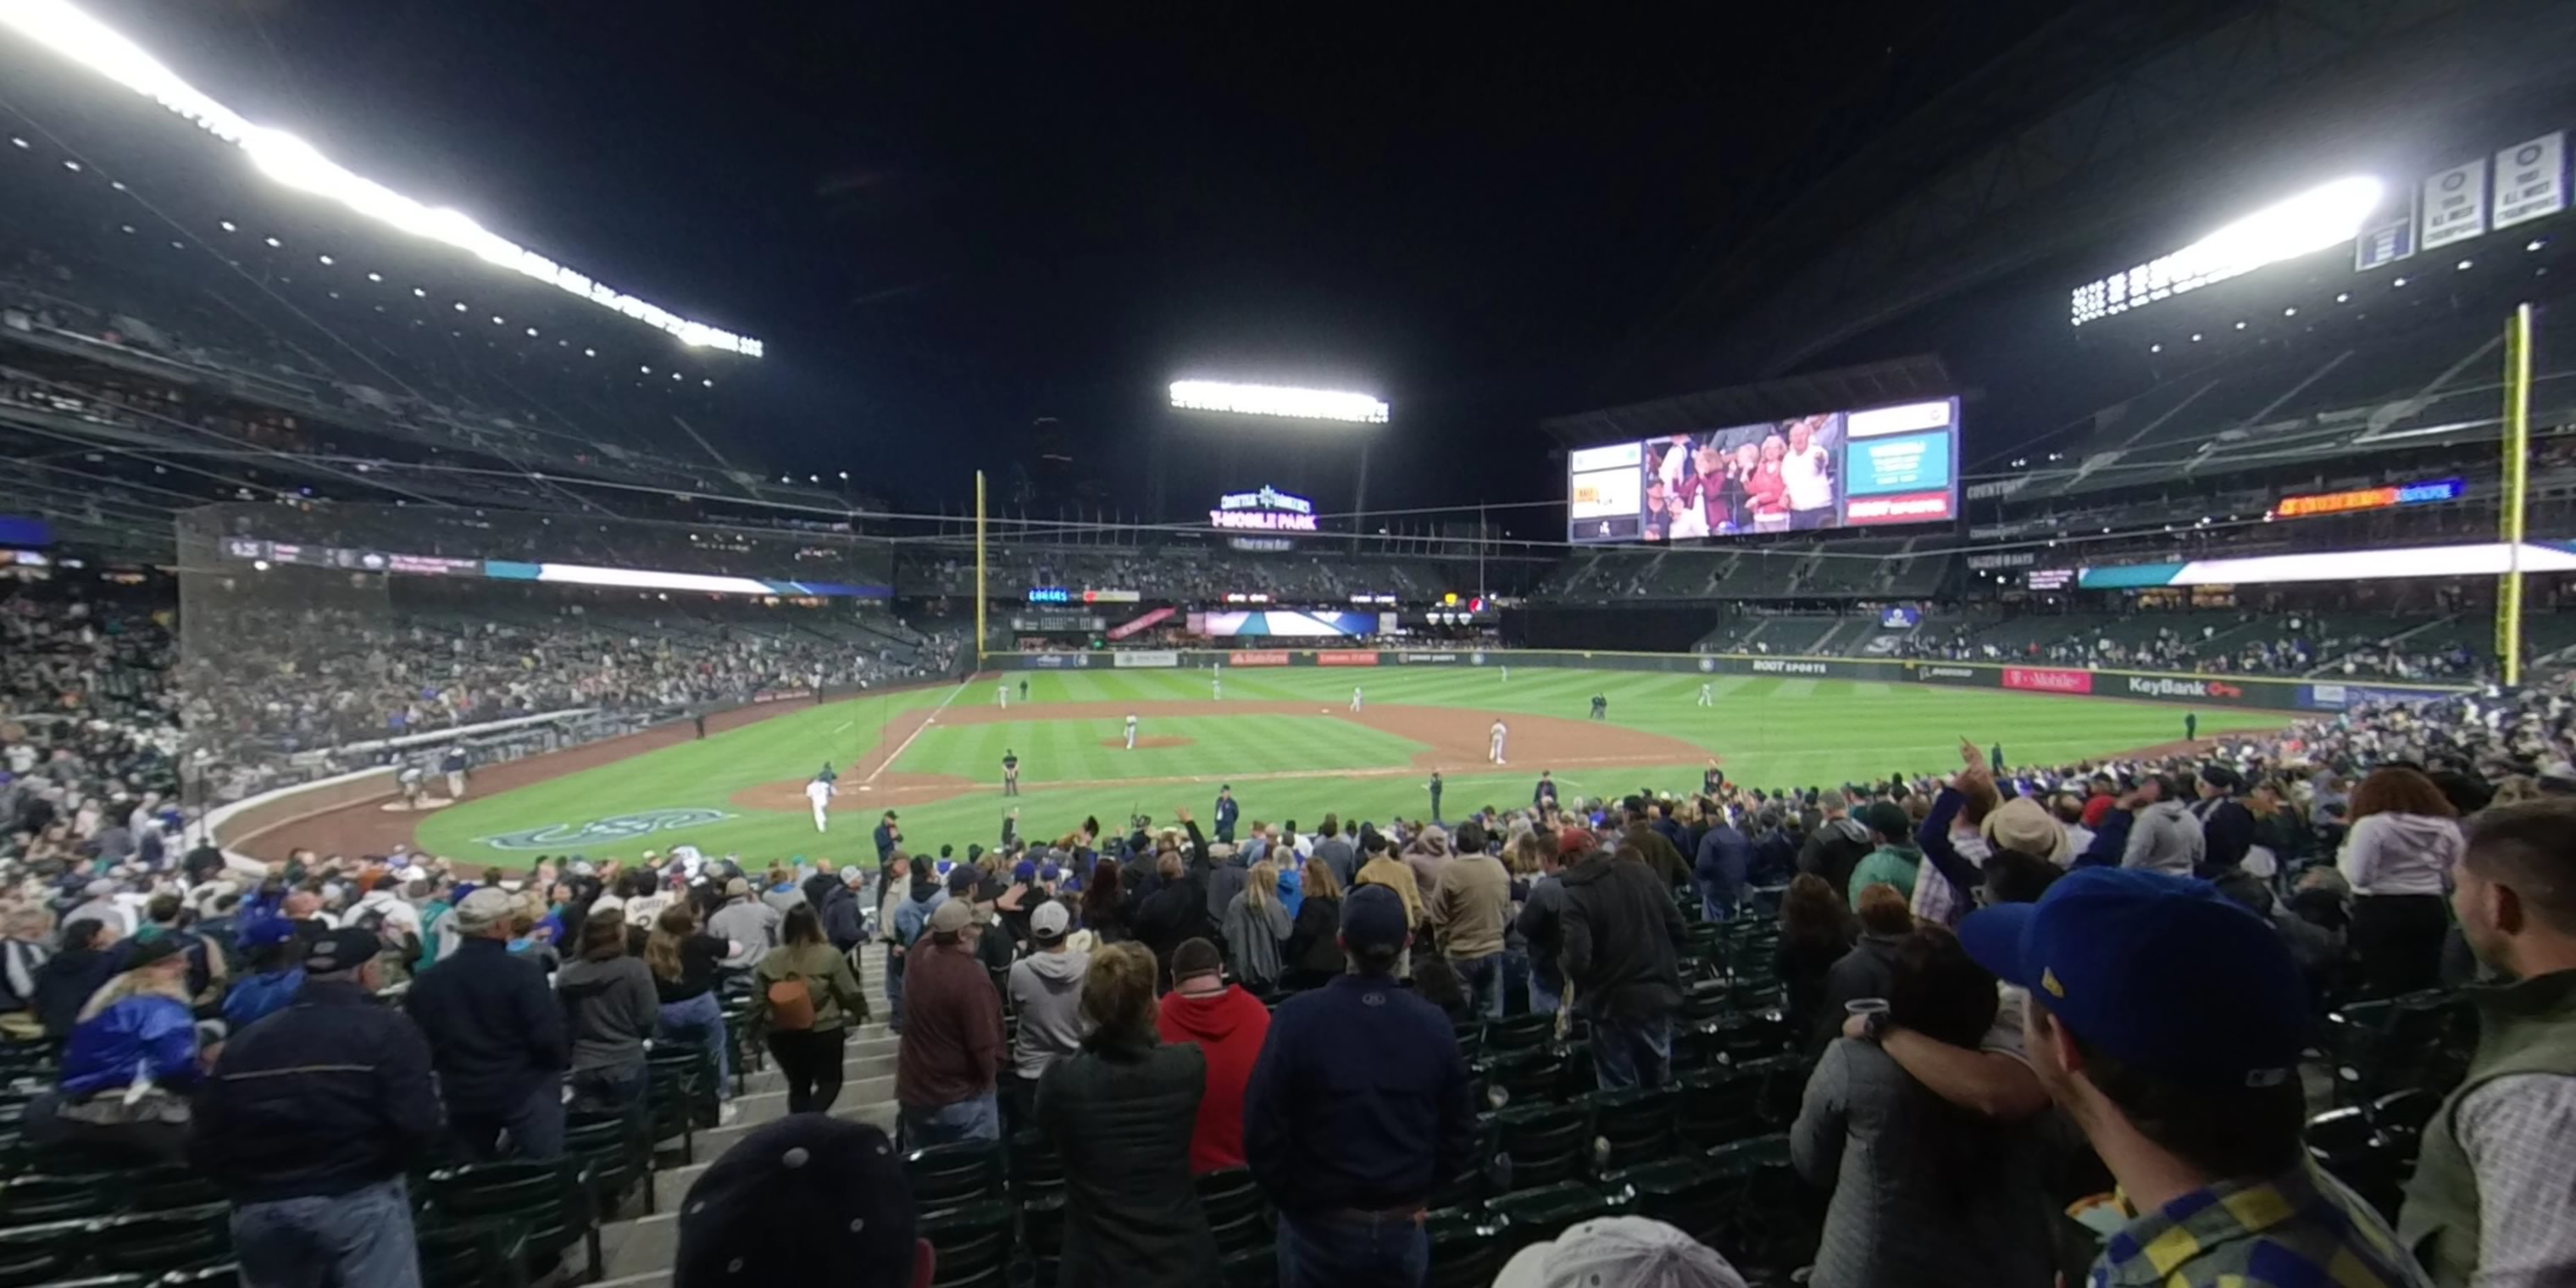 section 124 panoramic seat view  for baseball - t-mobile park